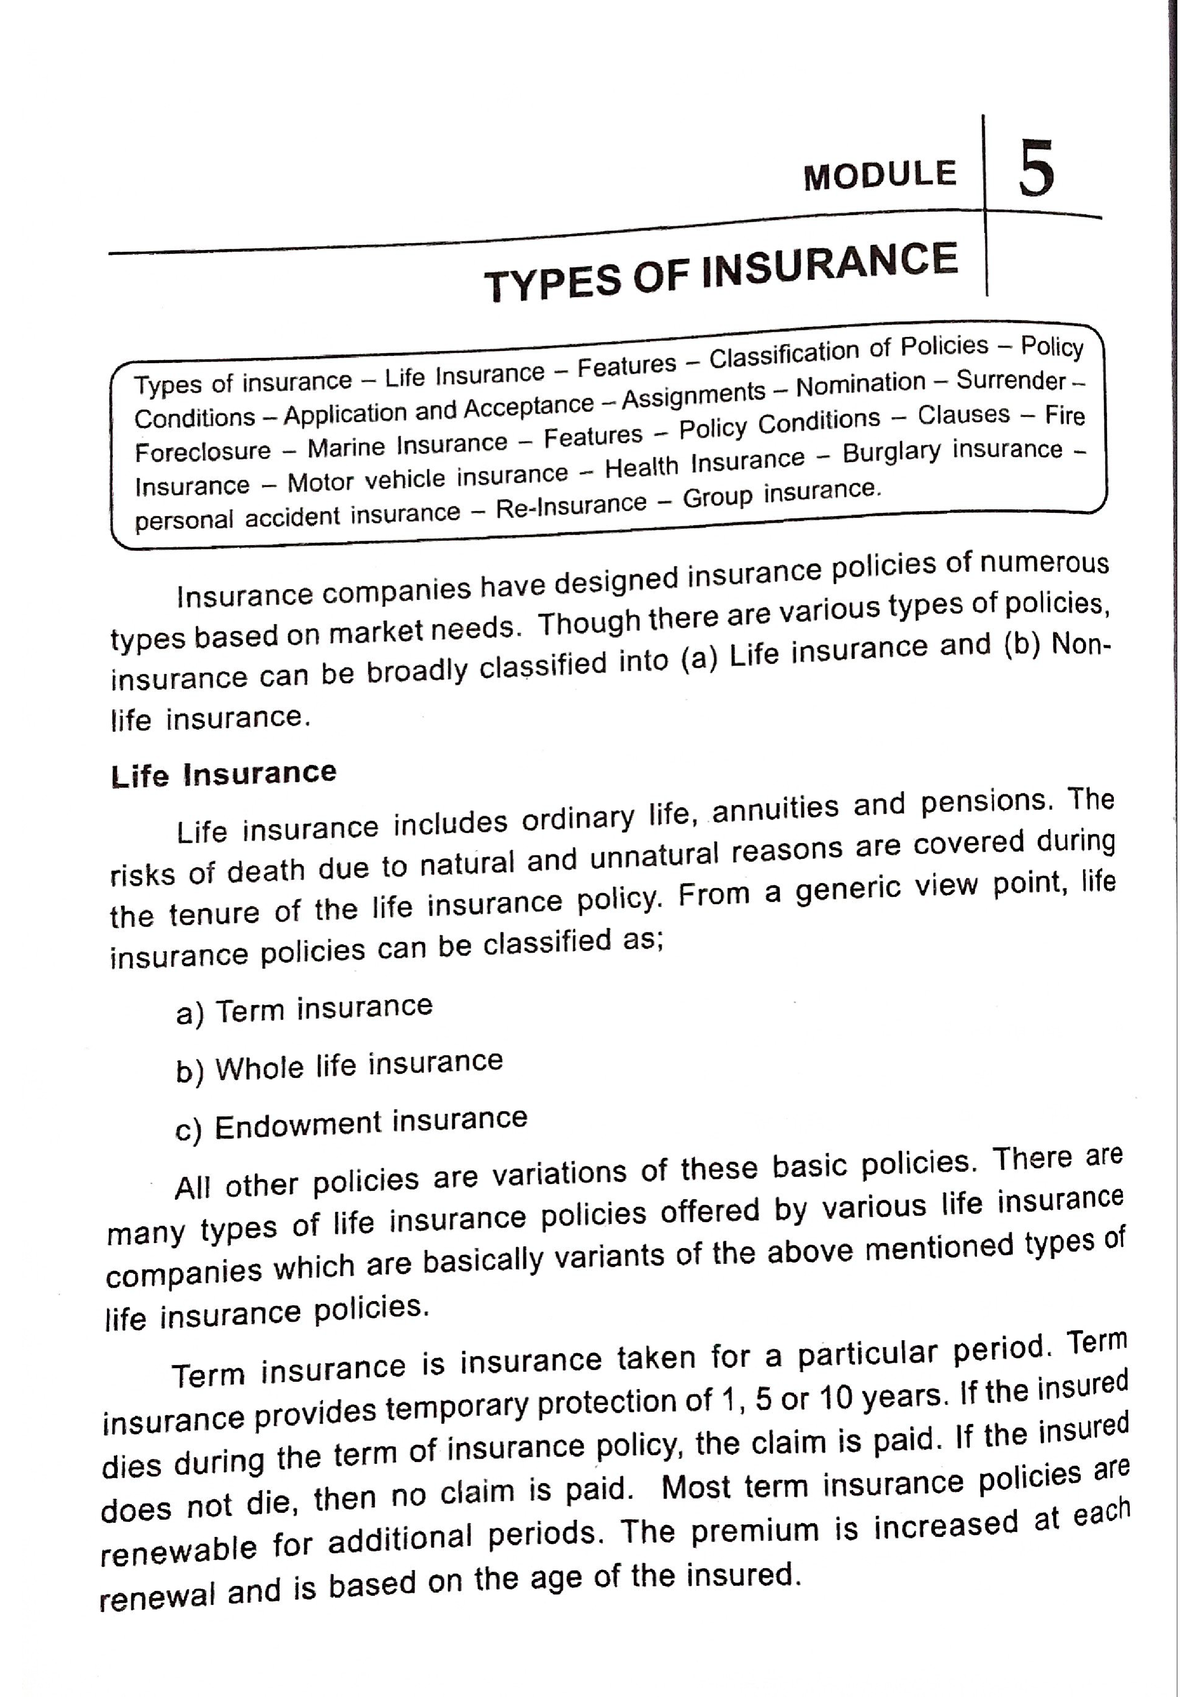 assignments of life insurance policies